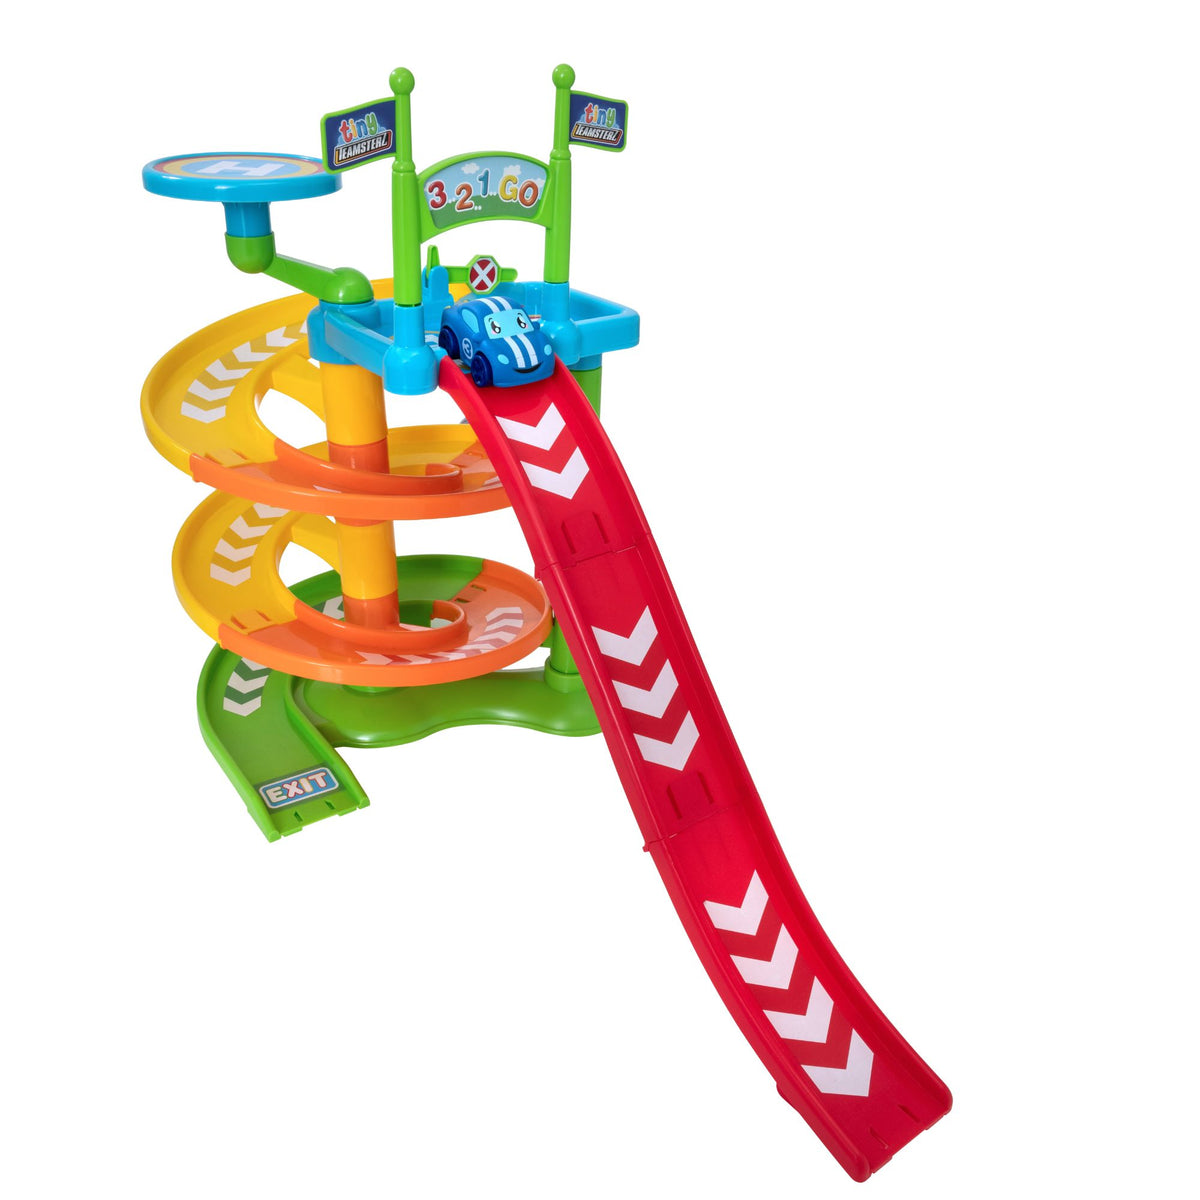 Tiny Teamsterz Spiral Raceway Launcher | Includes 1 Soft Touch Car